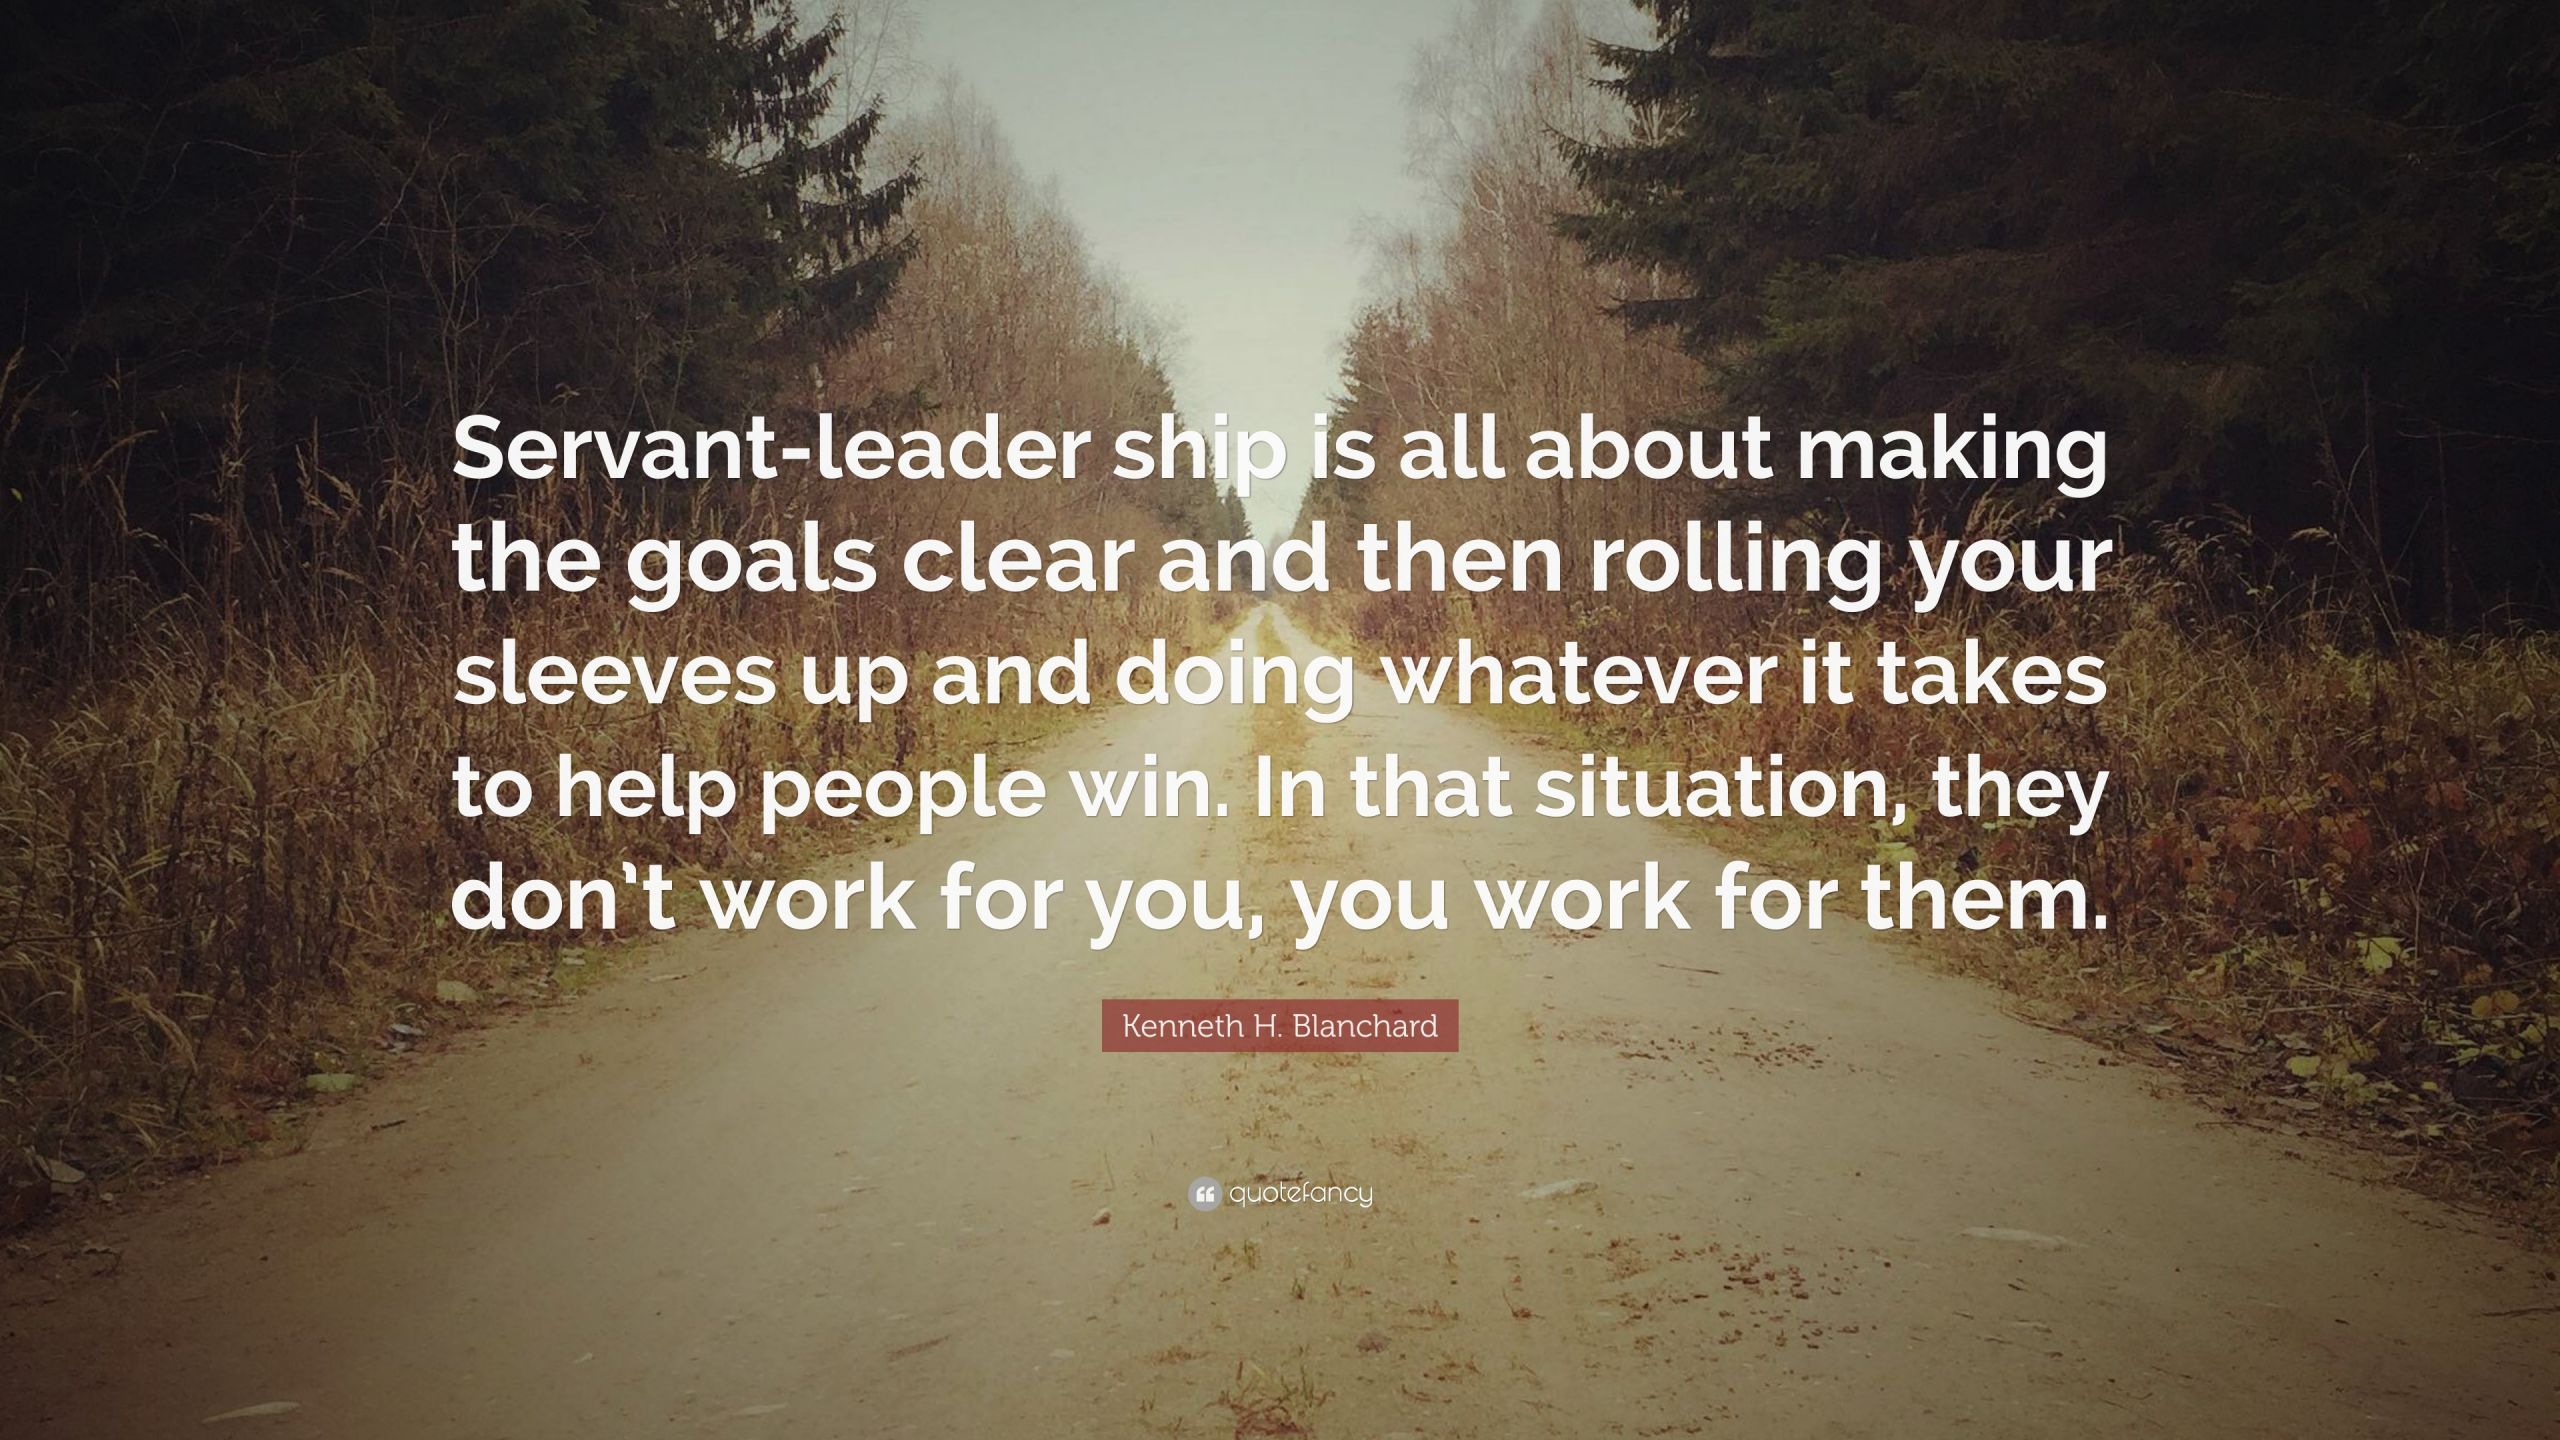 Servant Leadership Quote
 Kenneth H Blanchard Quote “Servant leader ship is all